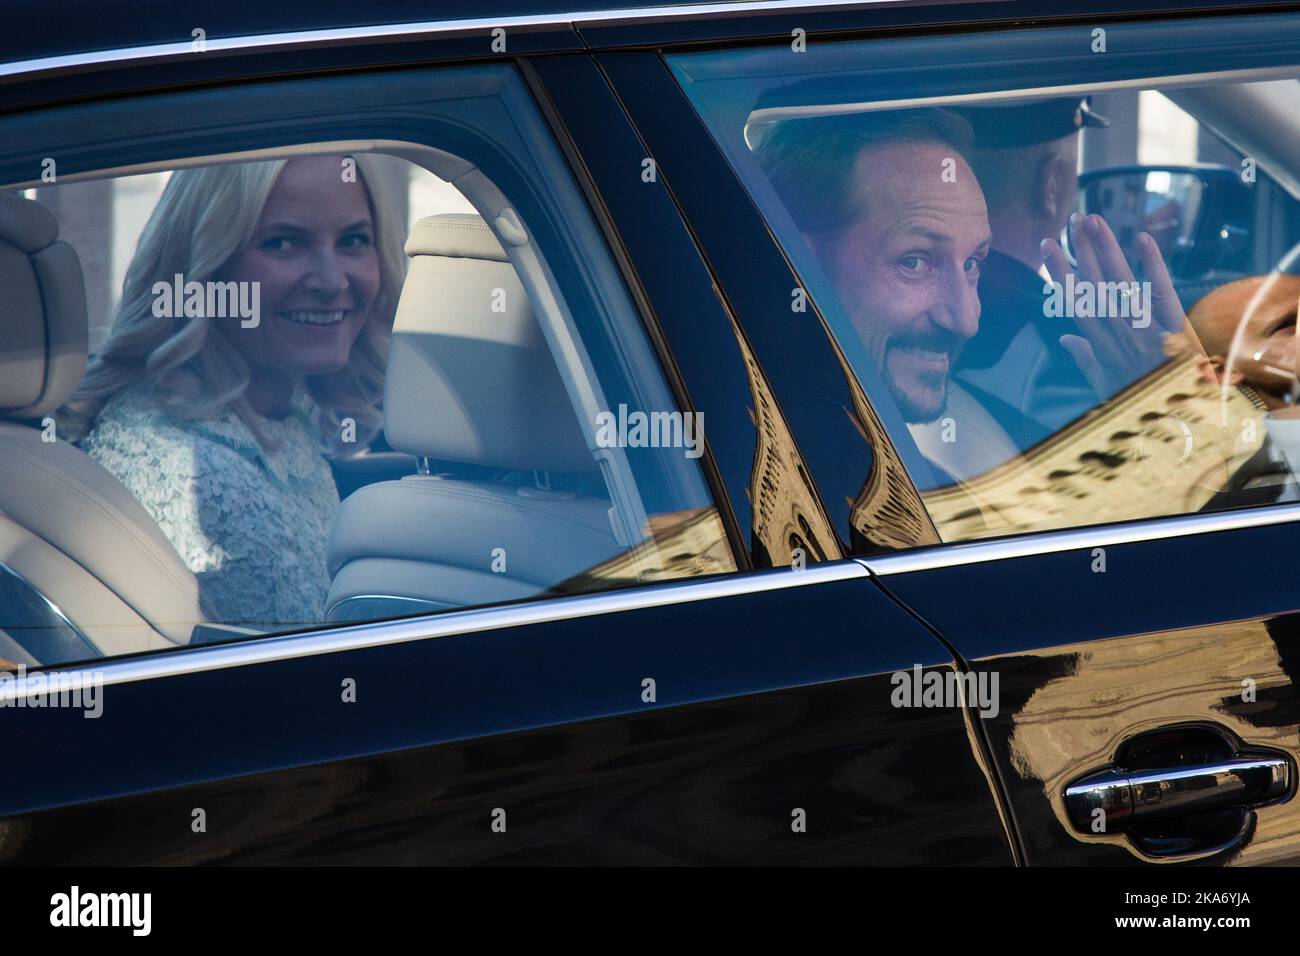 Oslo, Norway 20170918. Crown Princess Mette-Marit and Crown Prince Haakon in the car after the unveiling of The King and Queen's 80th anniversary gift from the Storting (Parliament) on Monday. The gift is a painting by Kira Wager called 'King Olav V's Oath for the Storting'. Photo: Audun Braastad / NTB scanpi Stock Photo